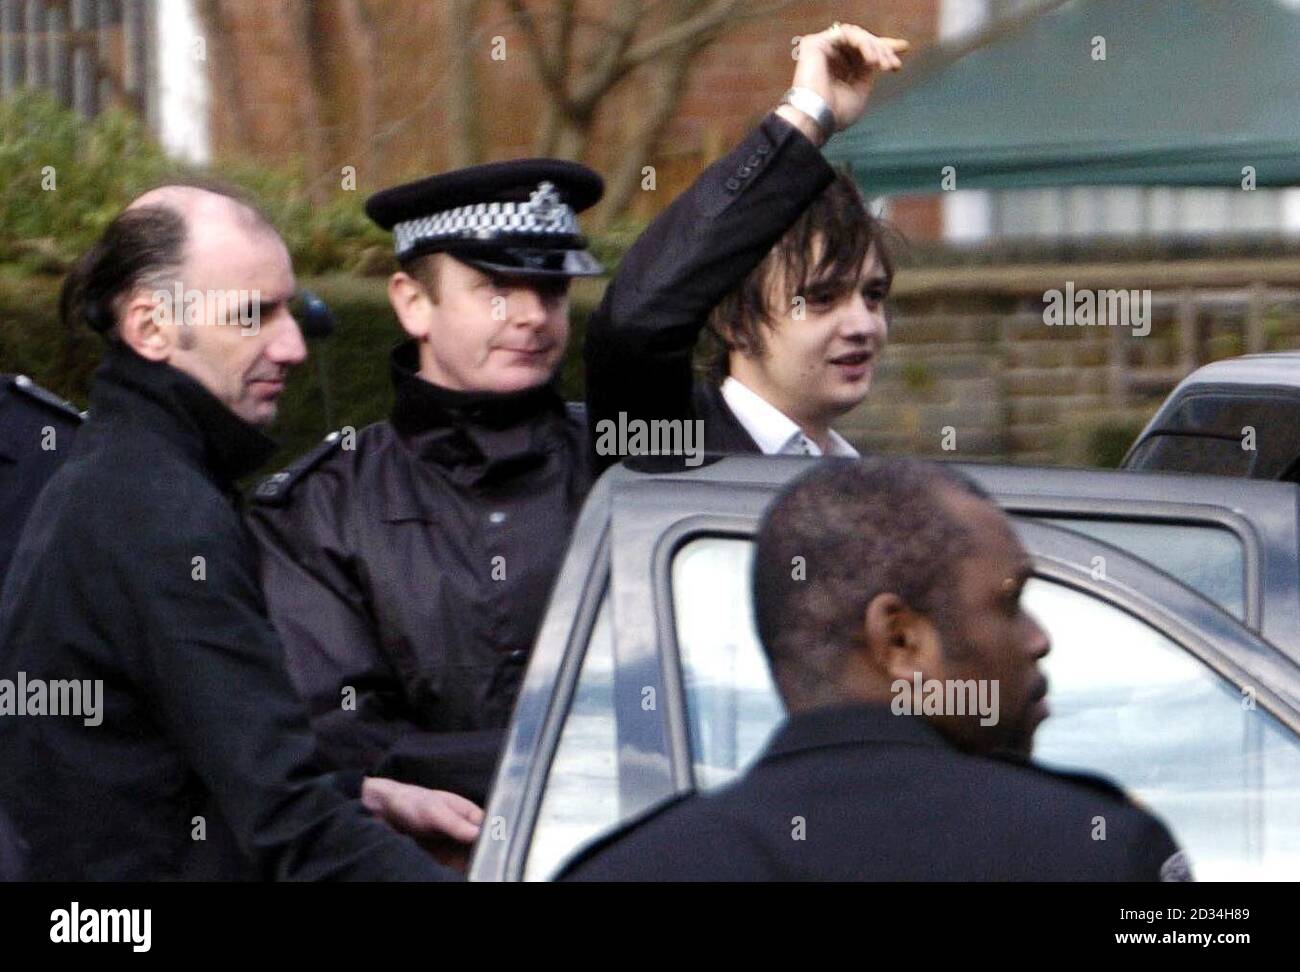 Pete Doherty leaves Ealing Magistrates Court in west London, Wednesday February 8, 2006, with a 12-month community order after admitting a series of drug offences. The 26-year-old Babyshambles front man and former boyfriend of Kate Moss was sentenced after earlier pleading guilty to seven charges of possessing illegal substances. The singer was also ordered to take part in a drug rehabilitation programme for 12 months and warned that if he breached this order, he could face a custodial sentence. See PA story COURTS Doherty. PRESS ASSOCIATION Photo. Photo credit should read: Ian Nicholson / PA. Stock Photo